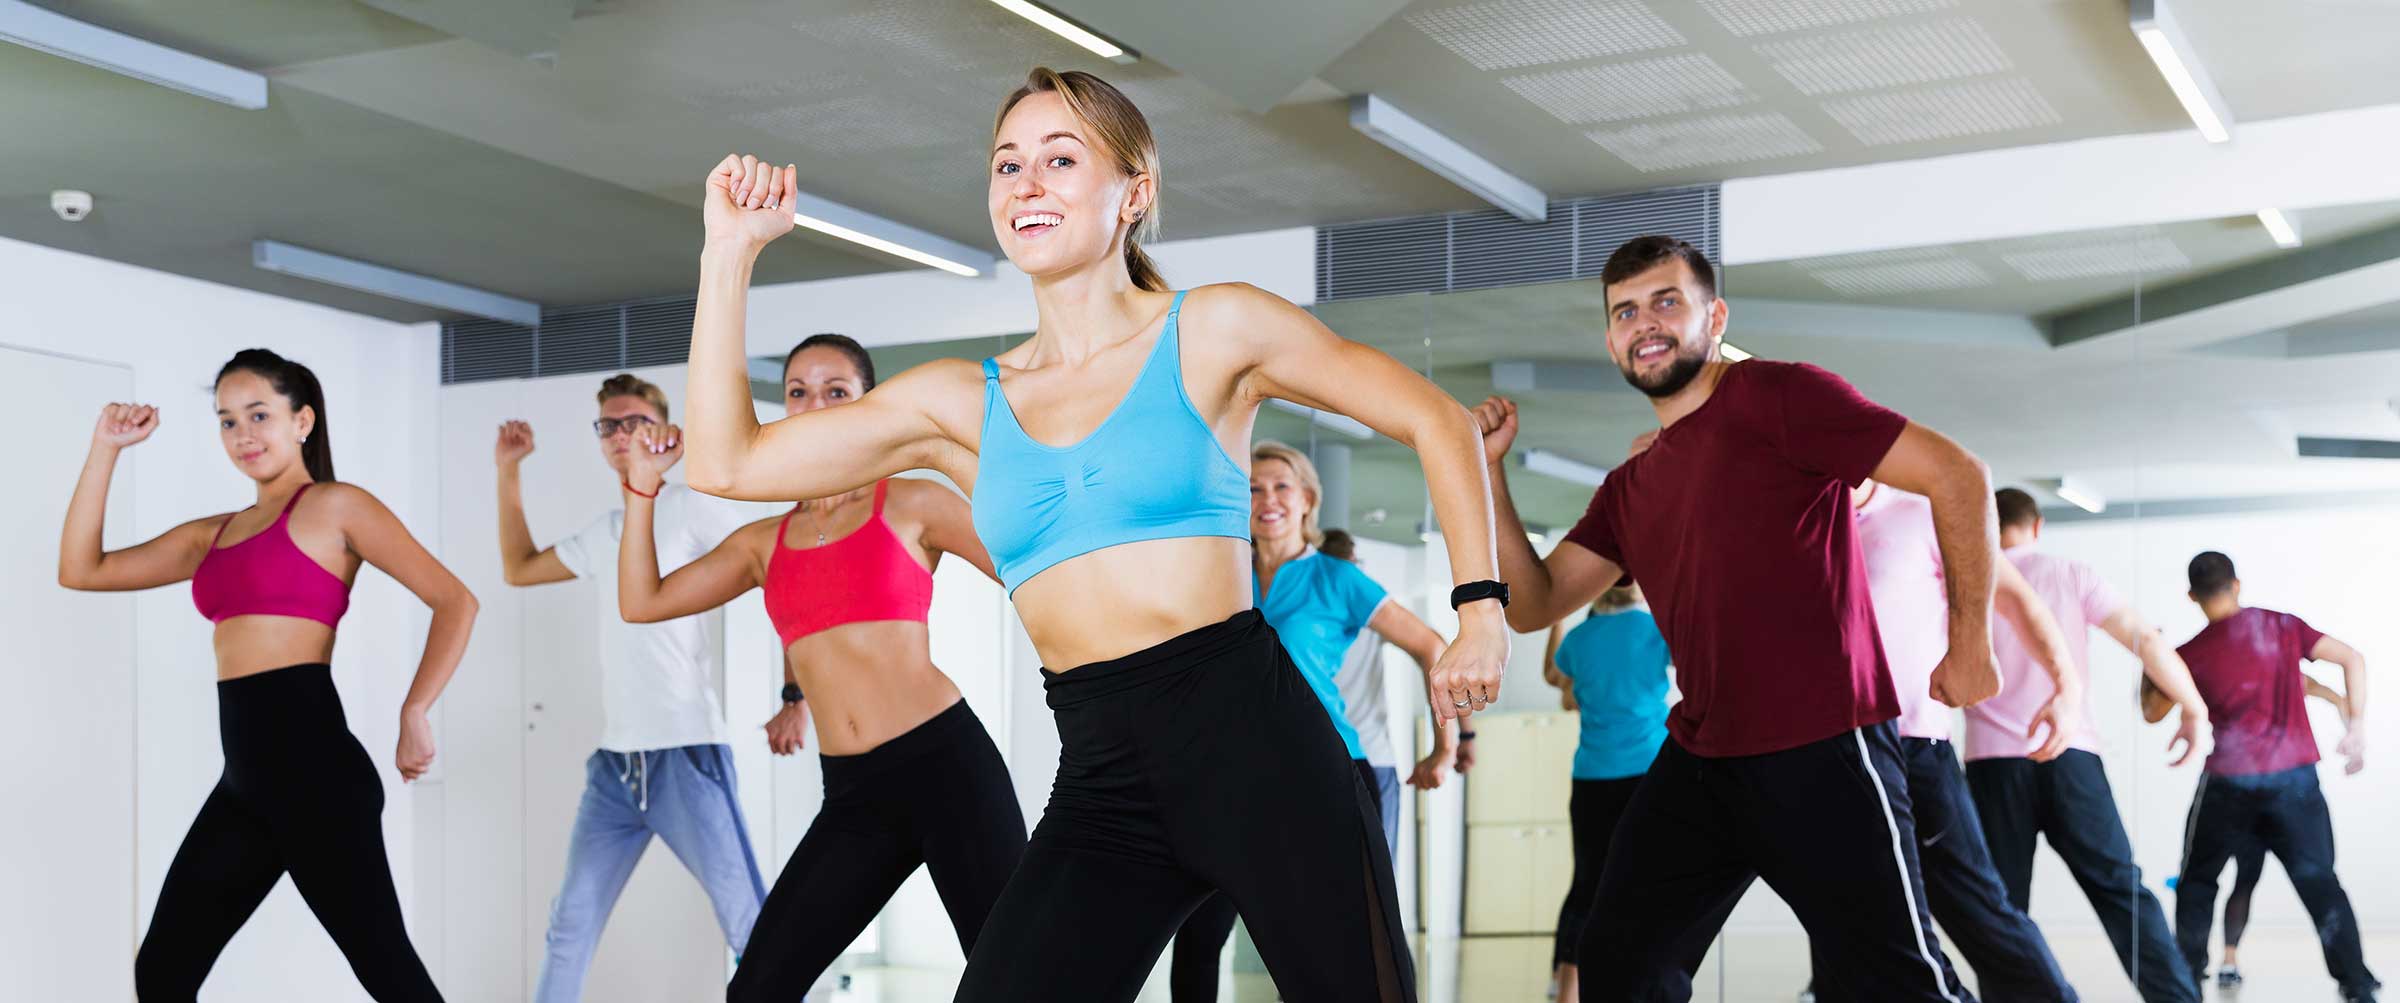 How to Benefit from Dance Cardio